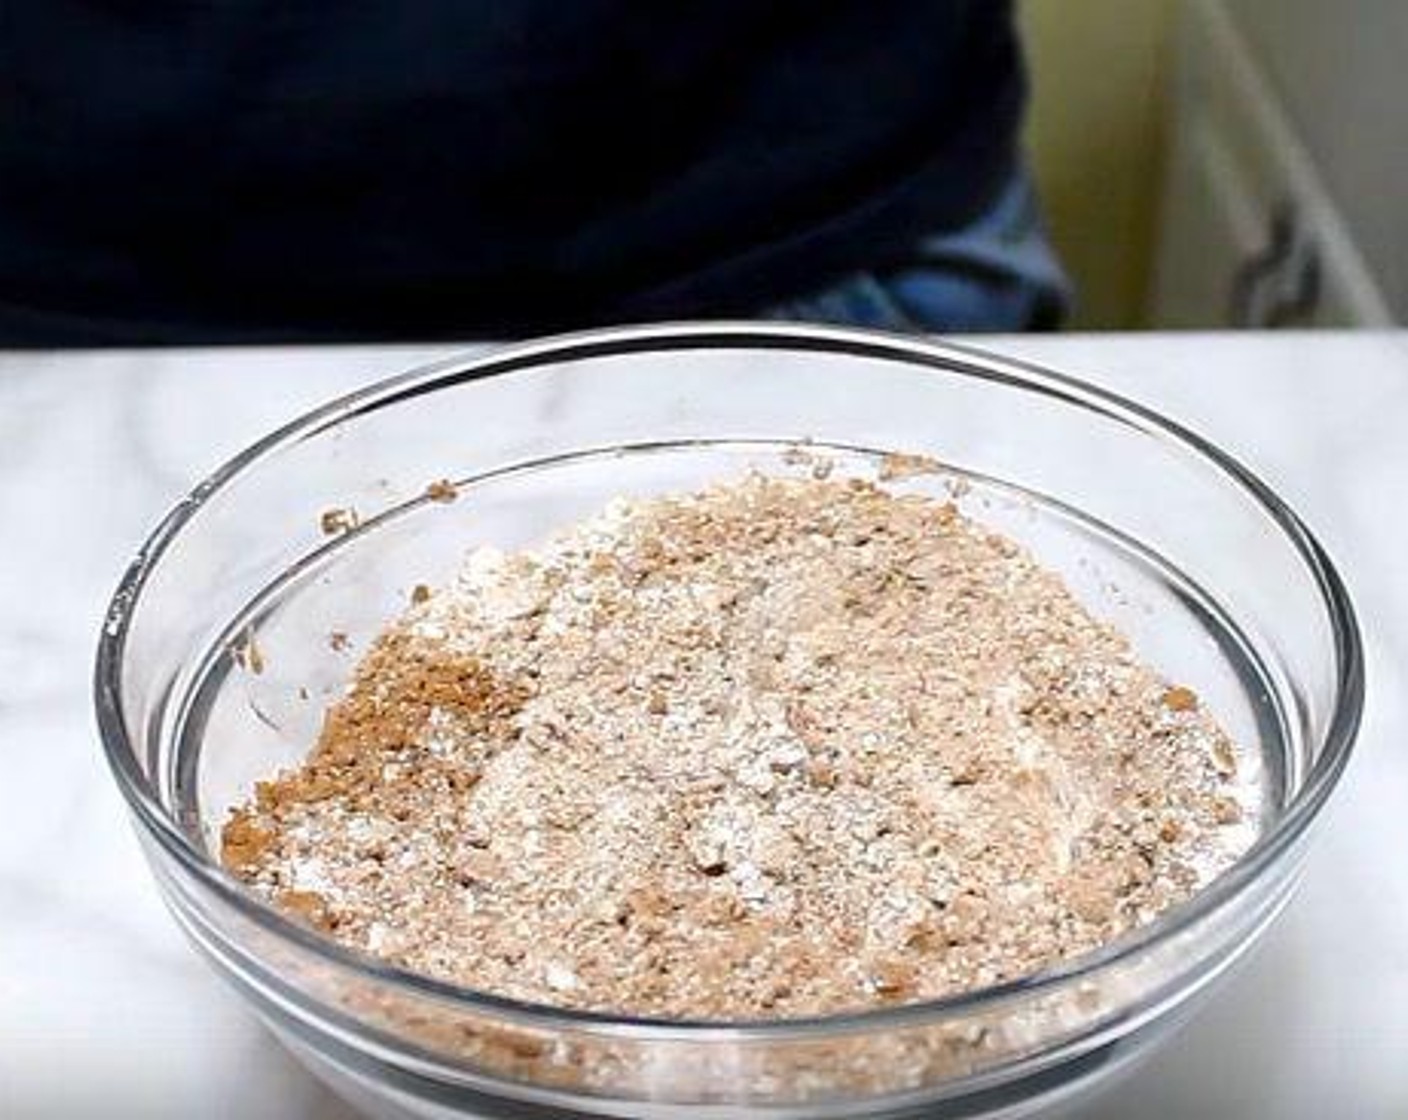 step 2 In a separate bowl, add Unsweetened Cocoa Powder (1/3 cup), All-Purpose Flour (1 cup), Baking Soda (1/2 tsp), and Salt (1/4 tsp). Stir to combine.